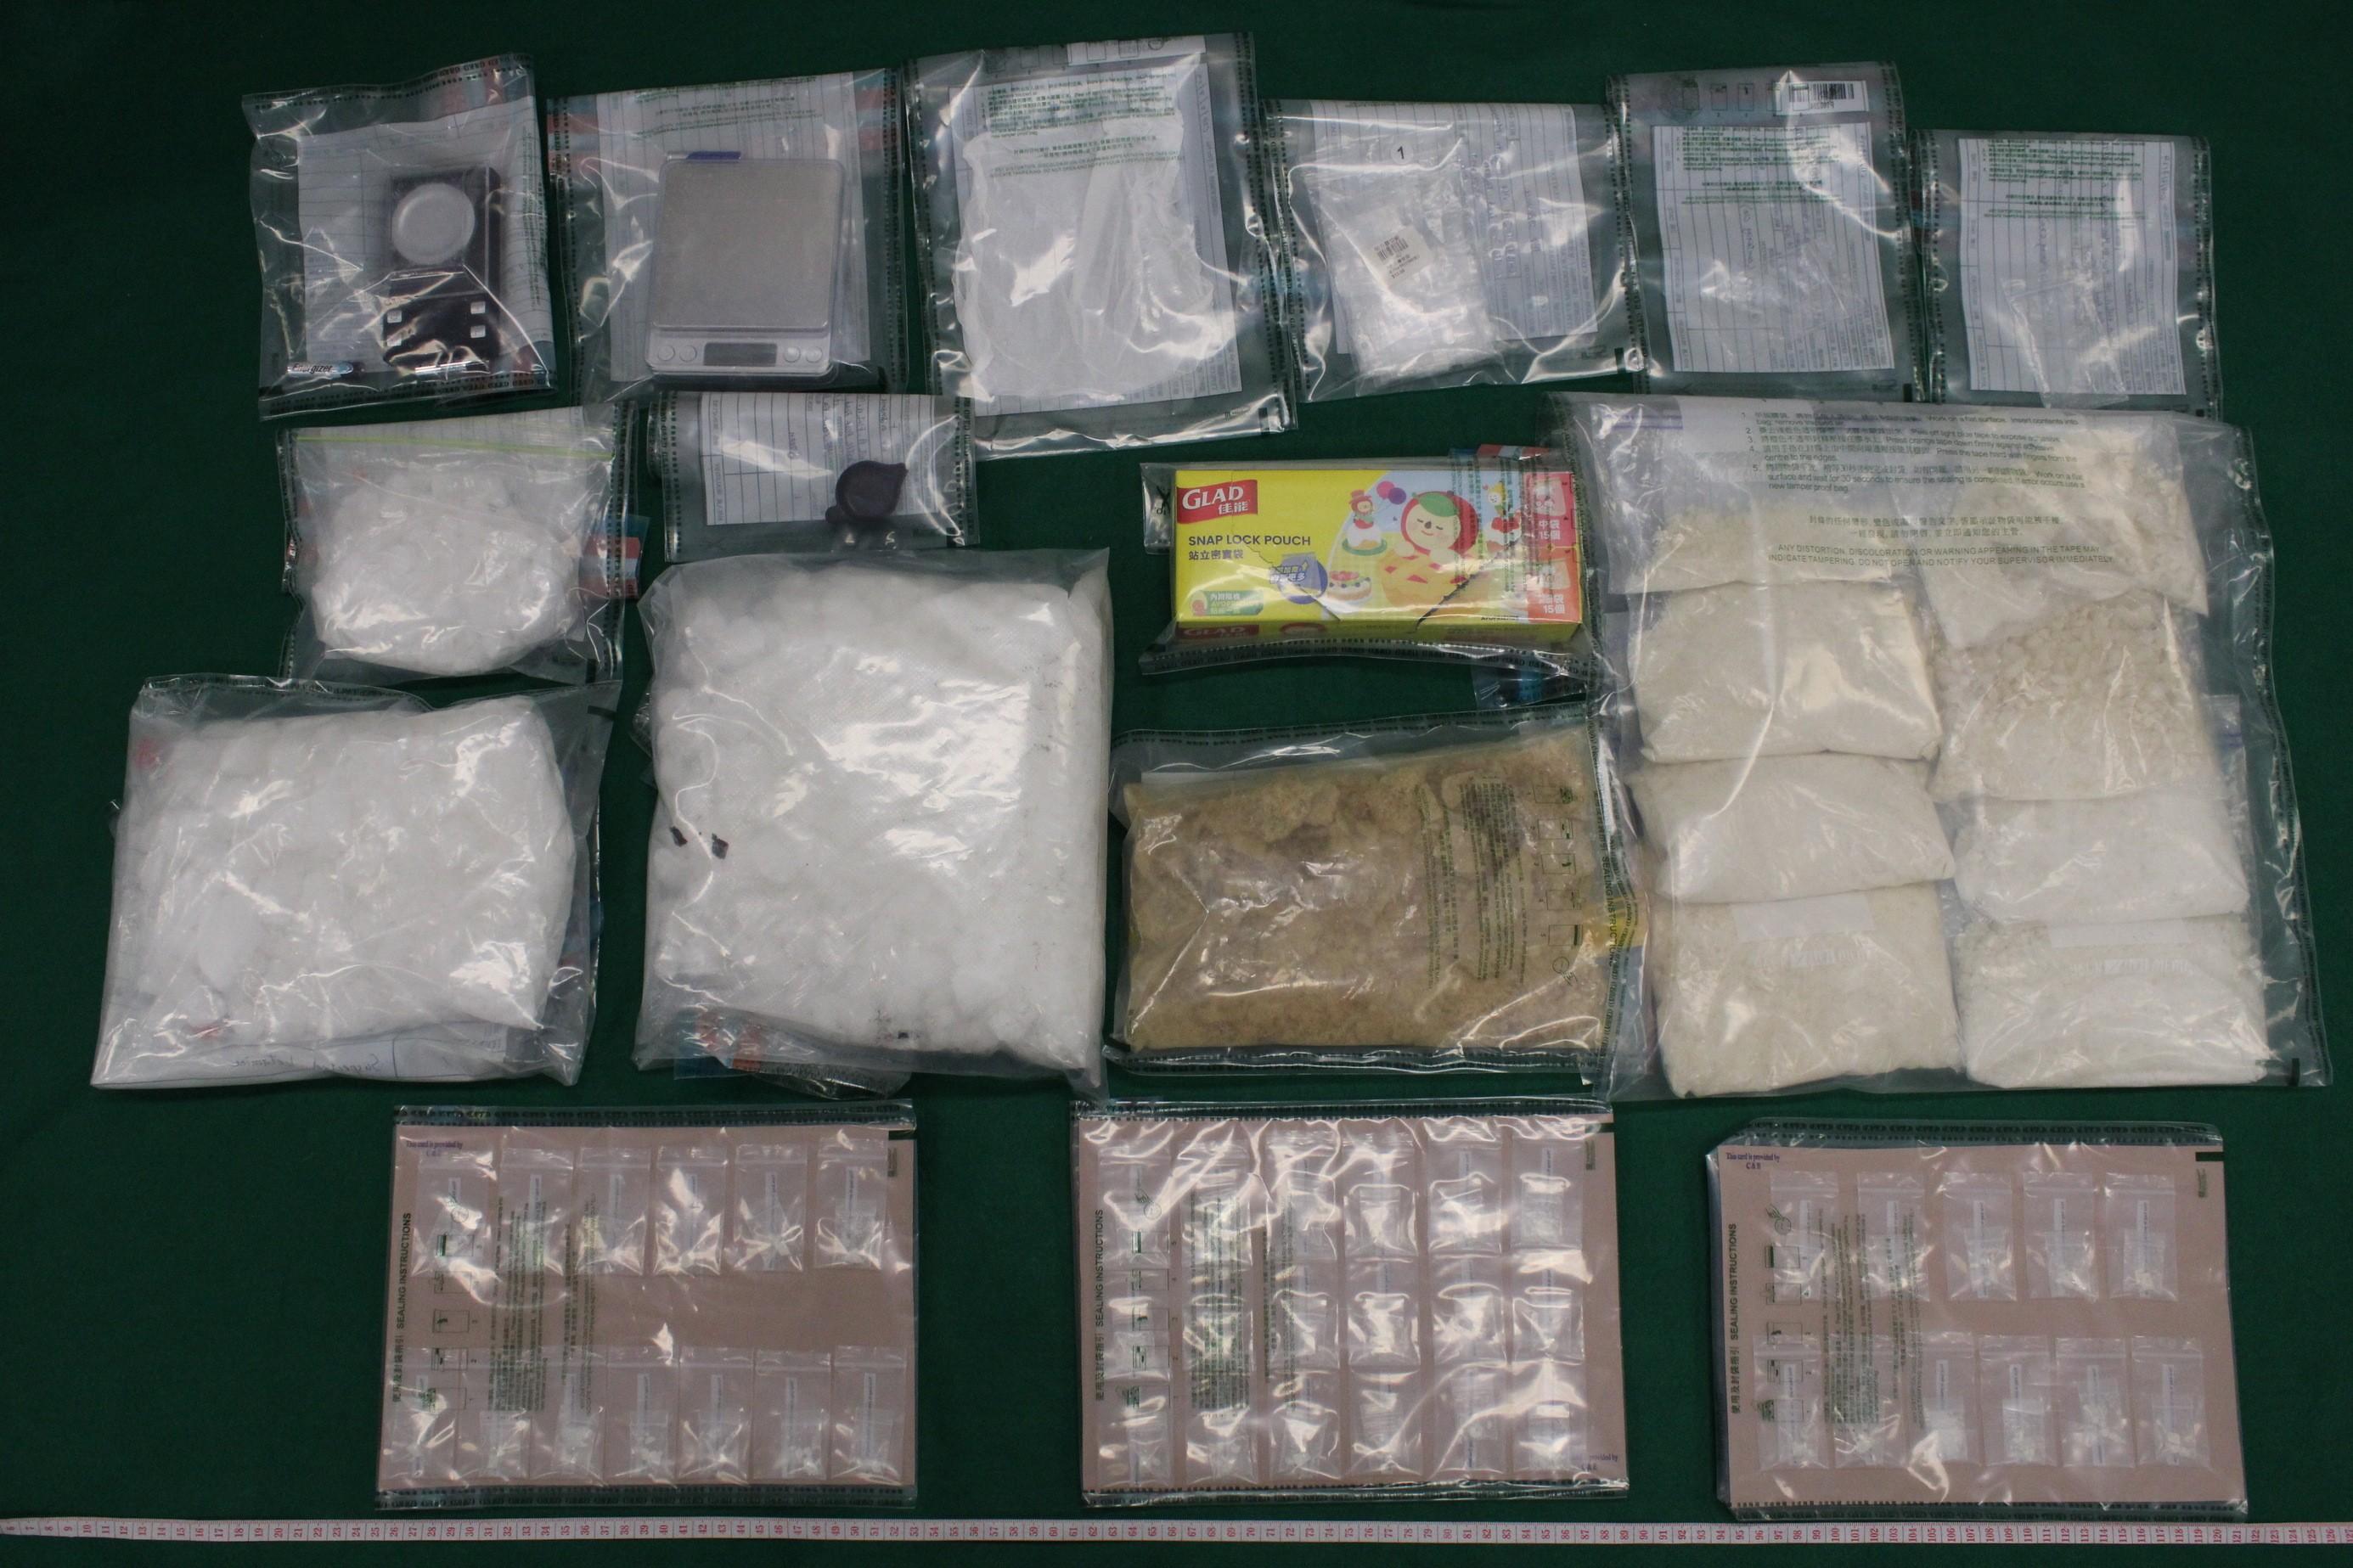 Hong Kong Customs on April 17 seized about 5.5 kilograms of suspected ketamine, about 14 grams of suspected crack cocaine and a batch of drug packaging paraphernalia in Cheung Sha Wan with a total estimated market value of about $3 million. One man was arrested. Photo shows the suspected dangerous drugs and drug packaging paraphernalia seized.